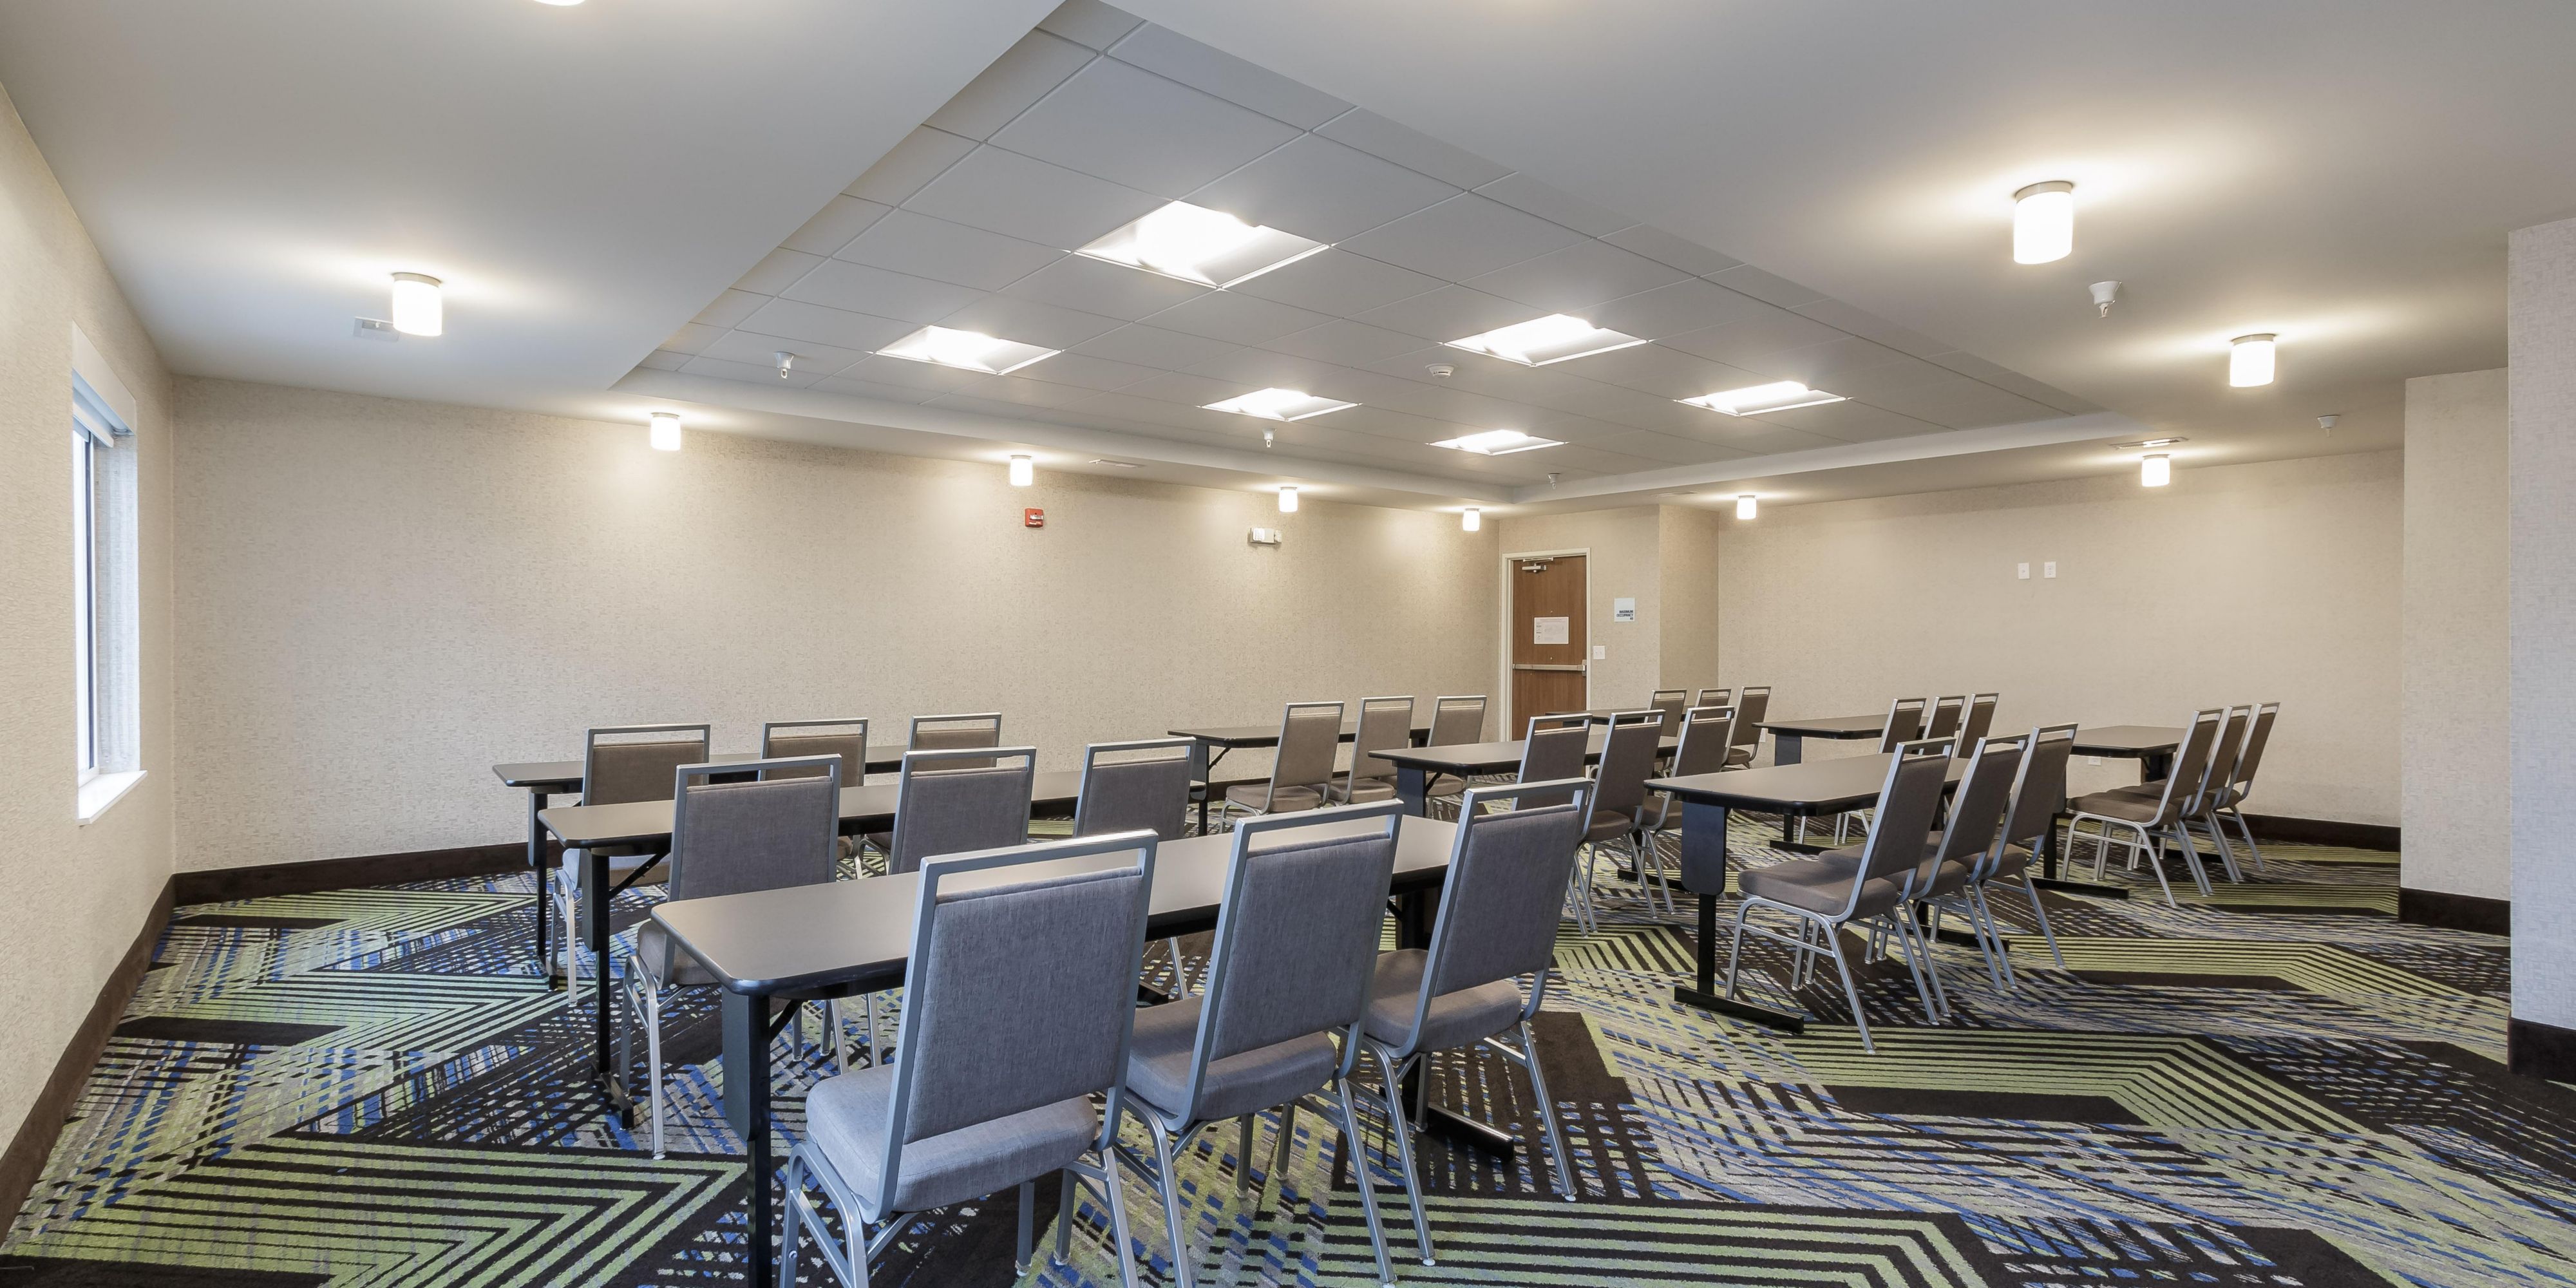 Bring your group to the Holiday Inn Express! We can accommodate up to 50 people theatre style. For questions or to book by phone: 1-574-2911040 or by email: Tawn Burnley at tburnley@jskhospitality.com.